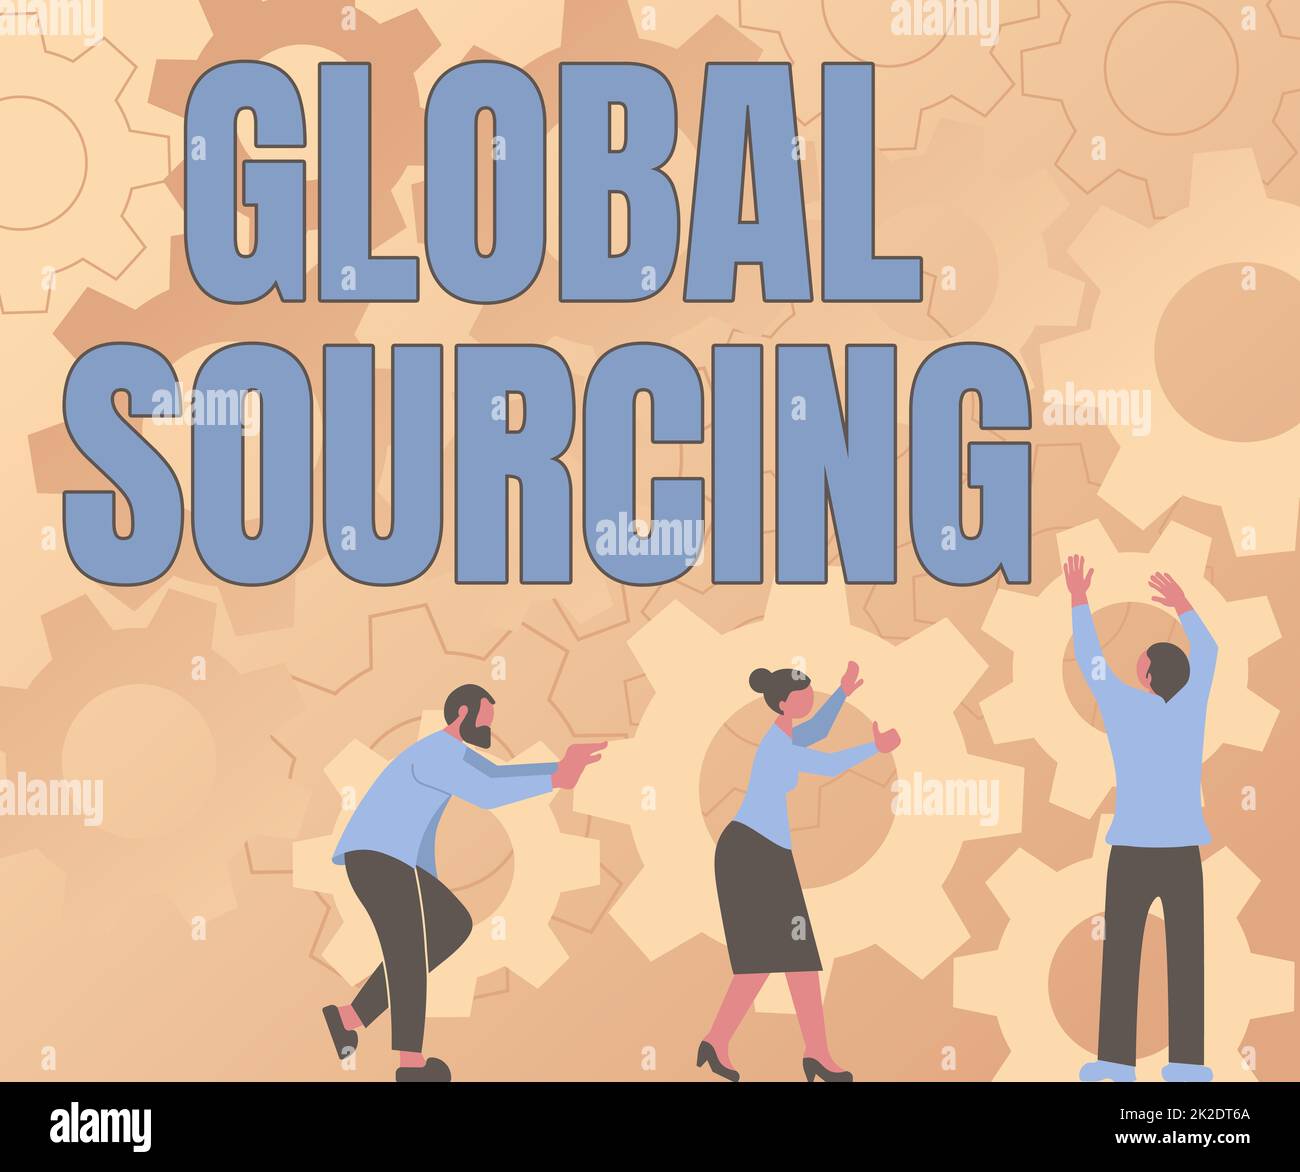 Hand writing sign Global Sourcing. Business concept practice of sourcing from the global market for goods Colleagues Carrying Cogwheels Arranging New Workflow Achieving Teamwork. Stock Photo